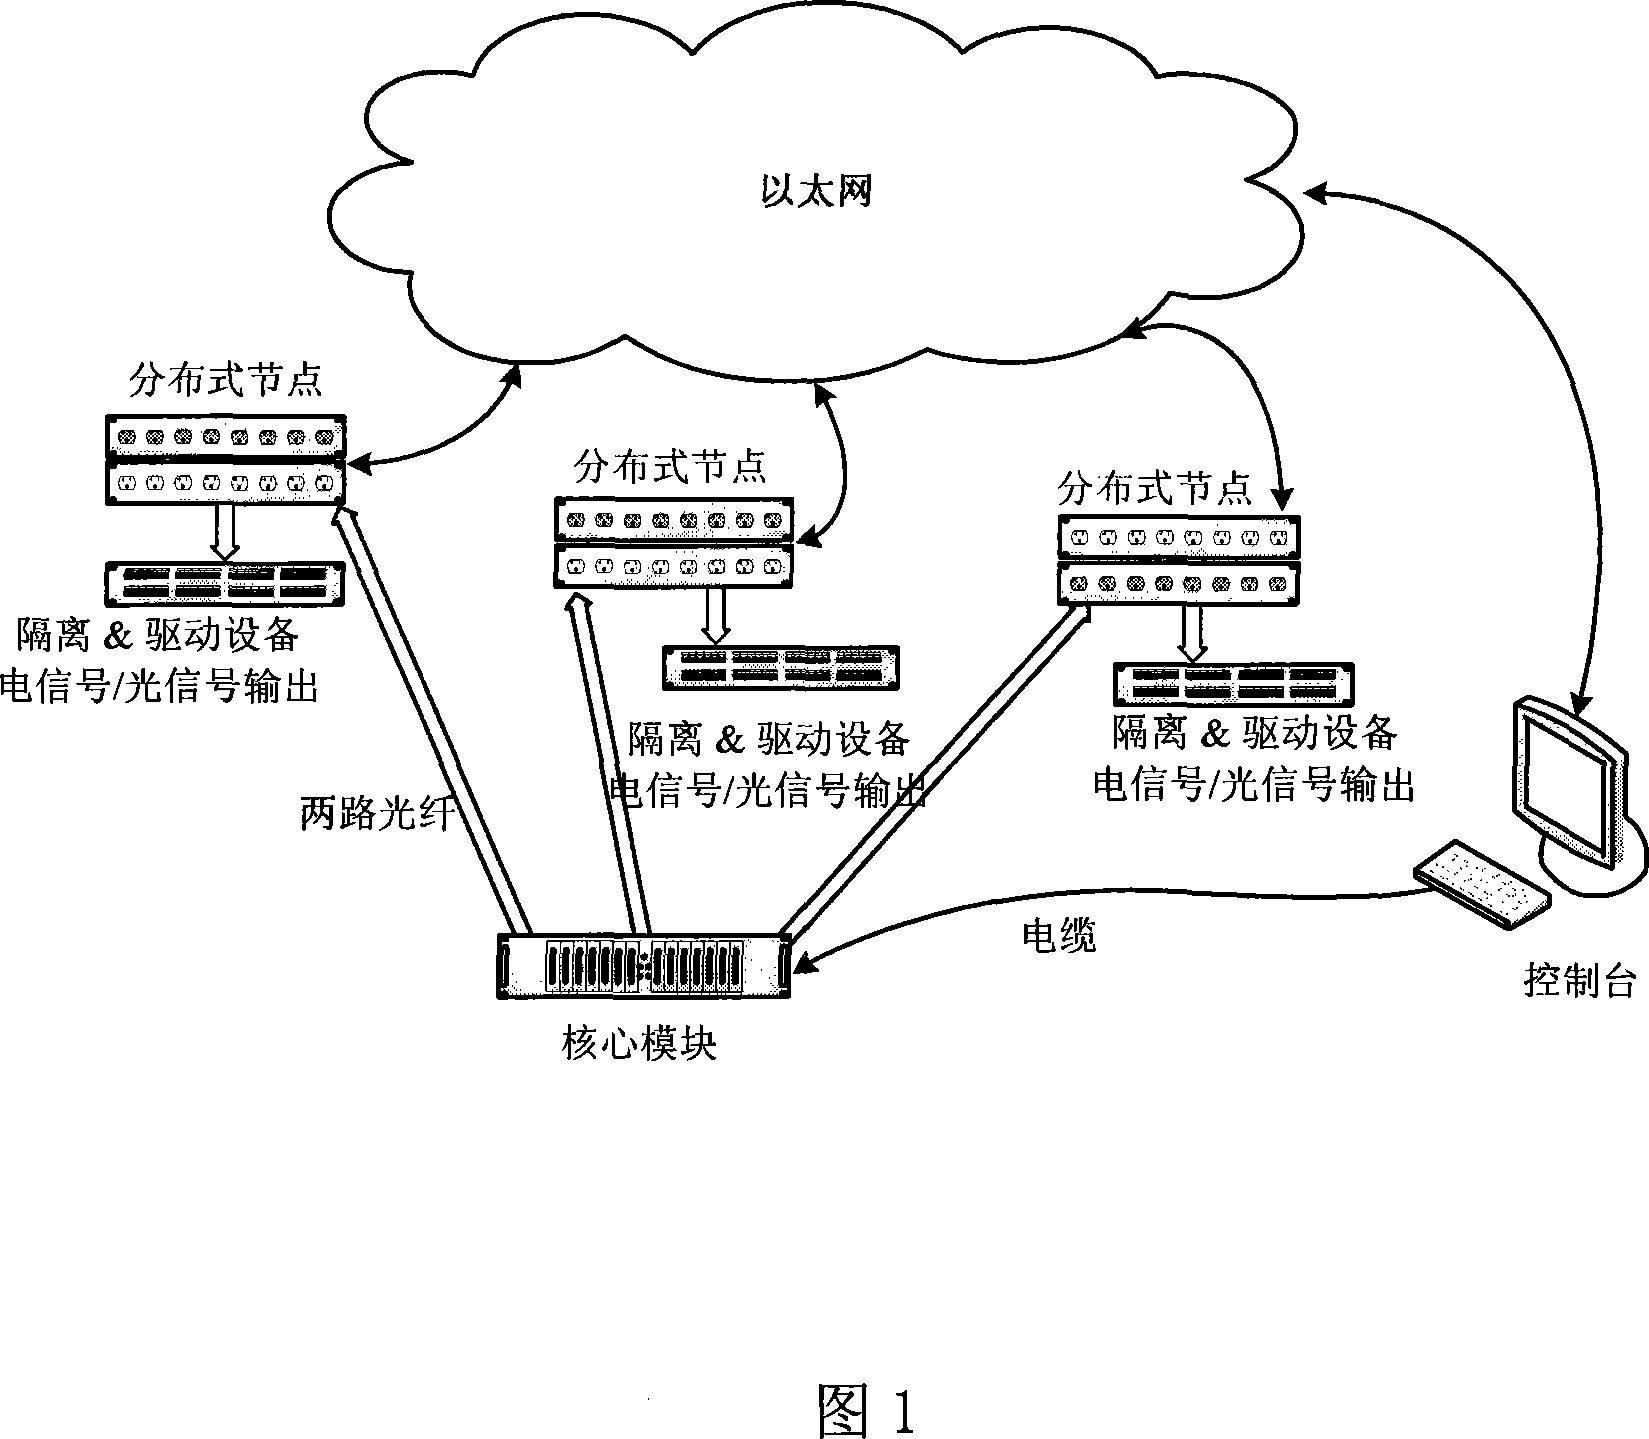 Distributed timing system